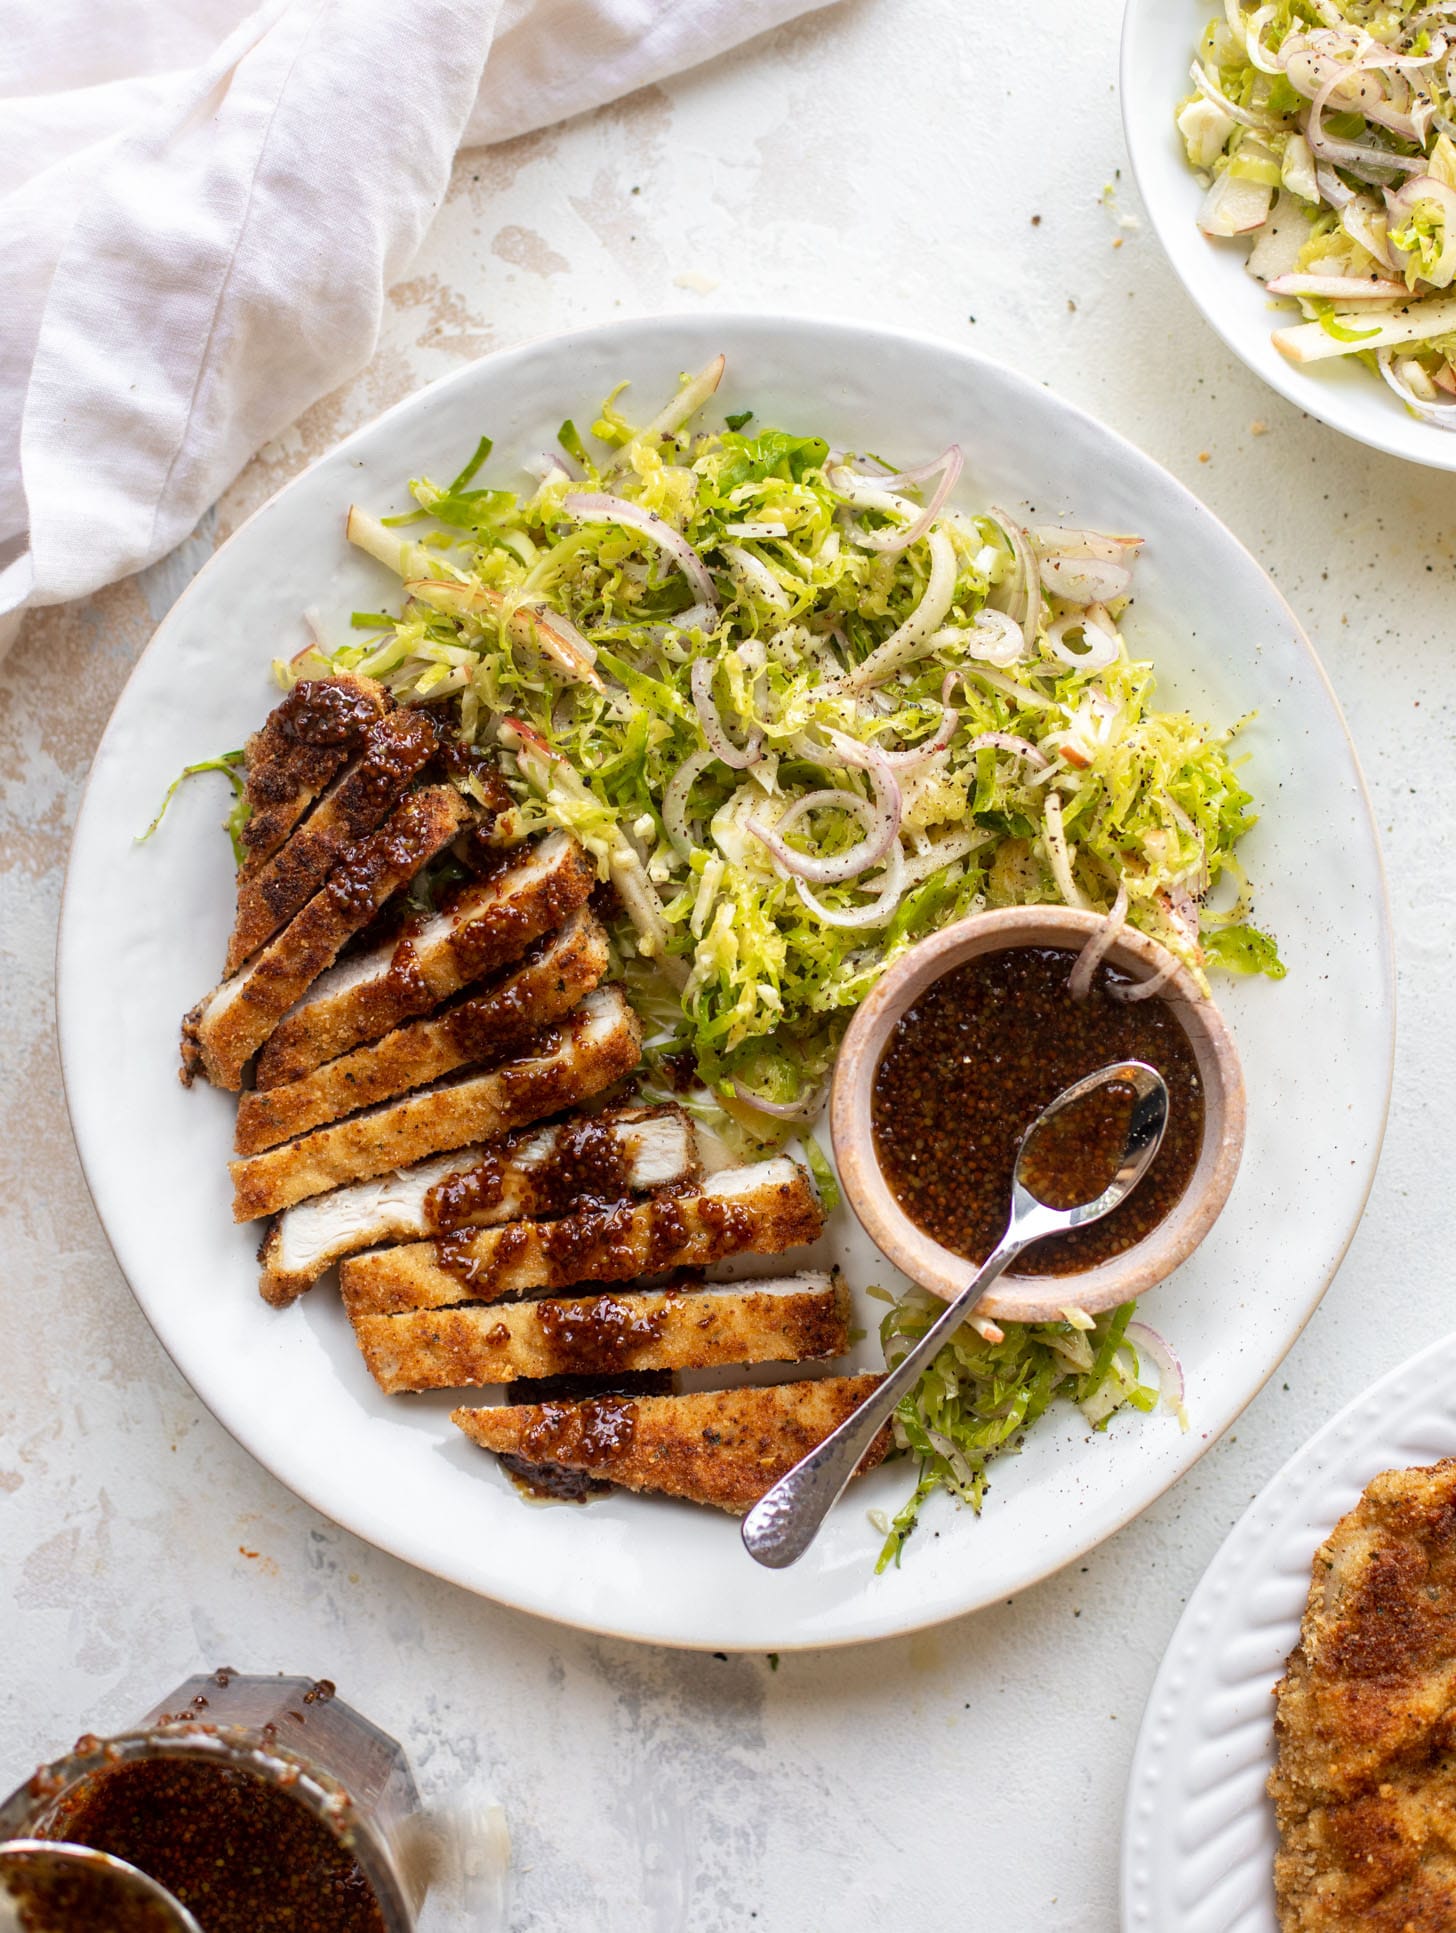 pork schnitzel with carolina gold BBQ sauce & brussels sprouts slaw